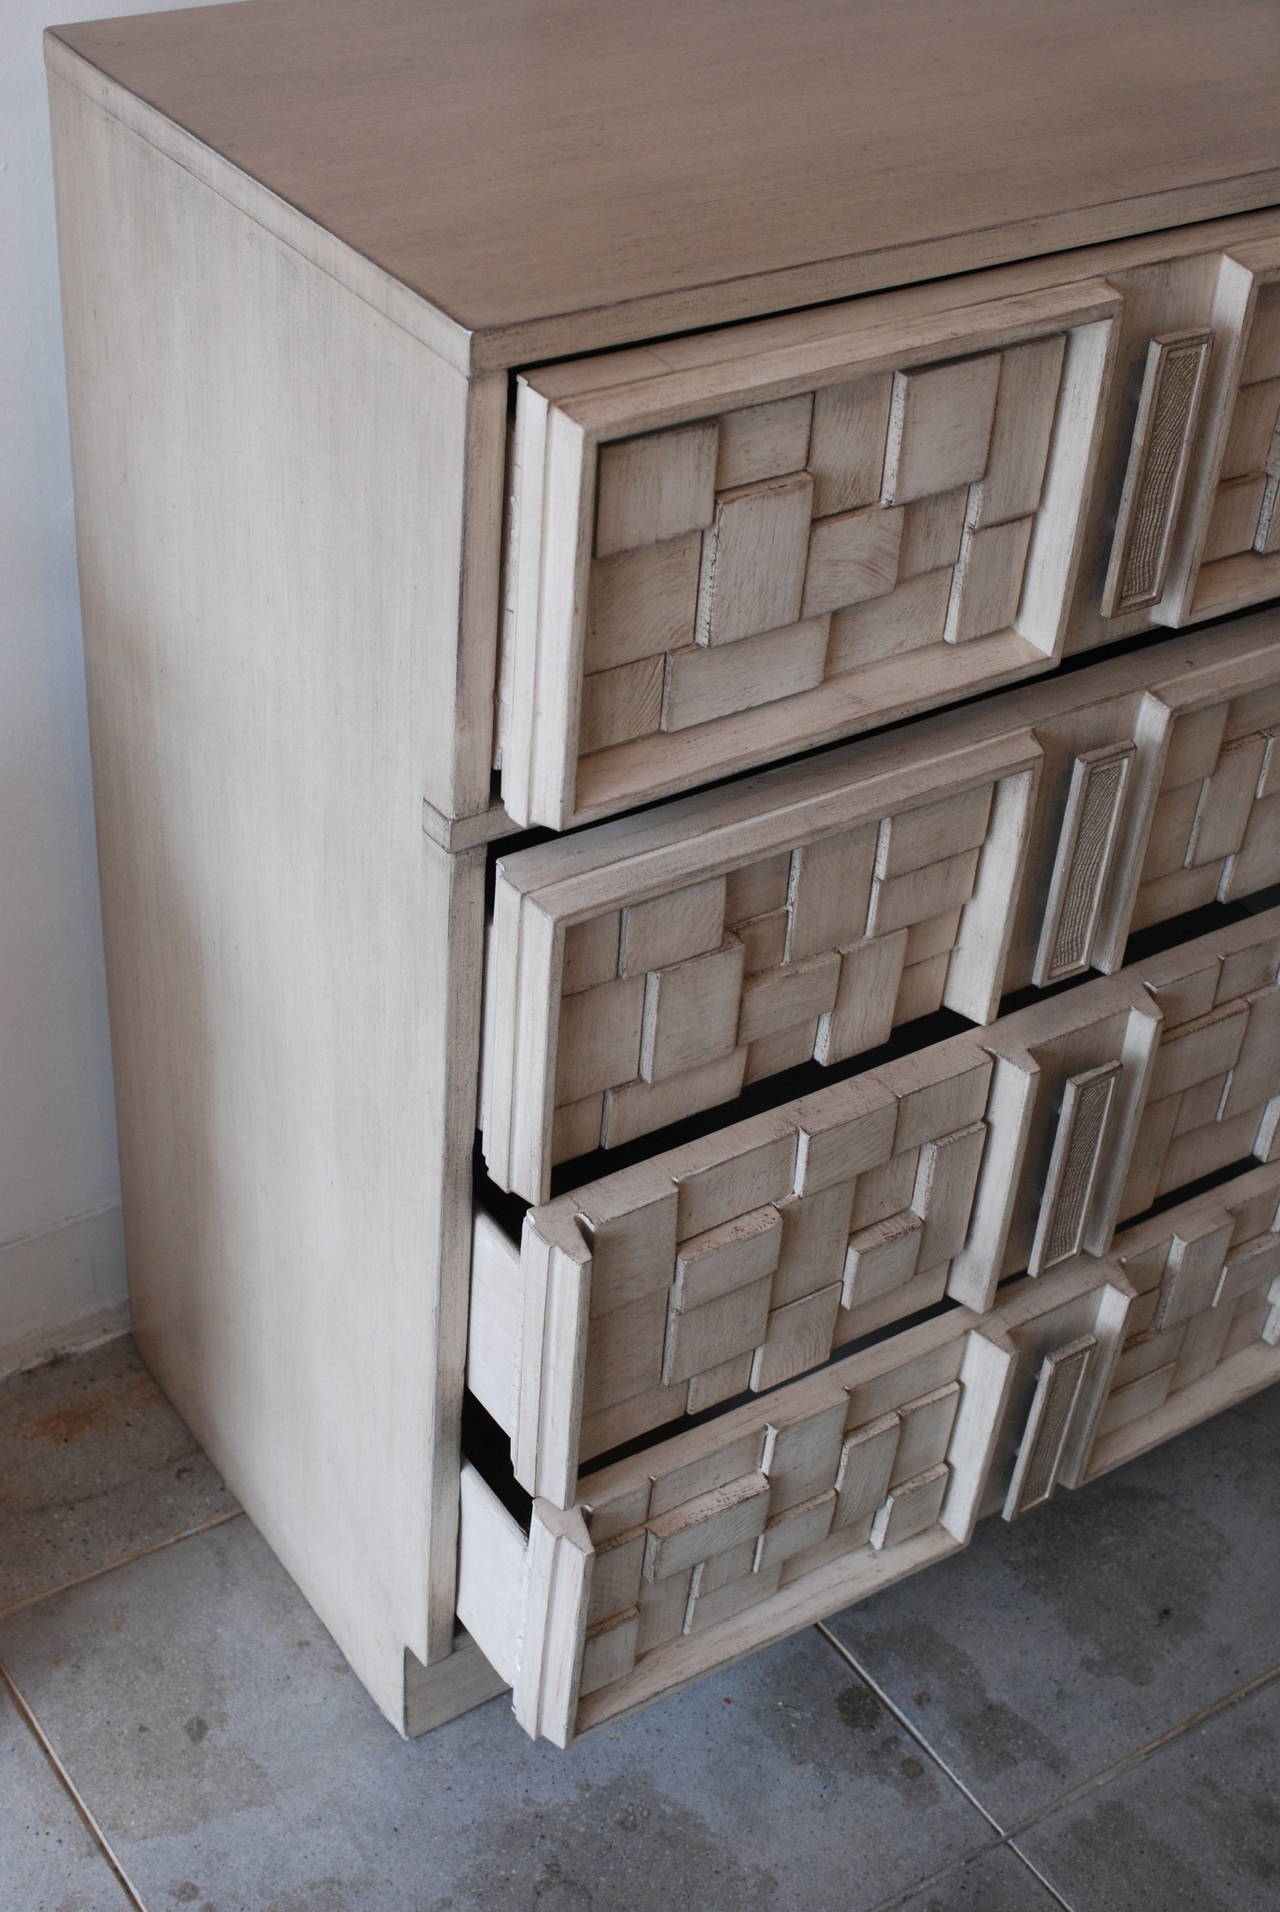 In the style of Paul Evans and Lane Furniture this hi-boy dresser has been refinished in our signature 'driftwood' finish that accentuates the relief work on the fascia of the drawer faces. The integrated custom hardware drawer pulls 
give this